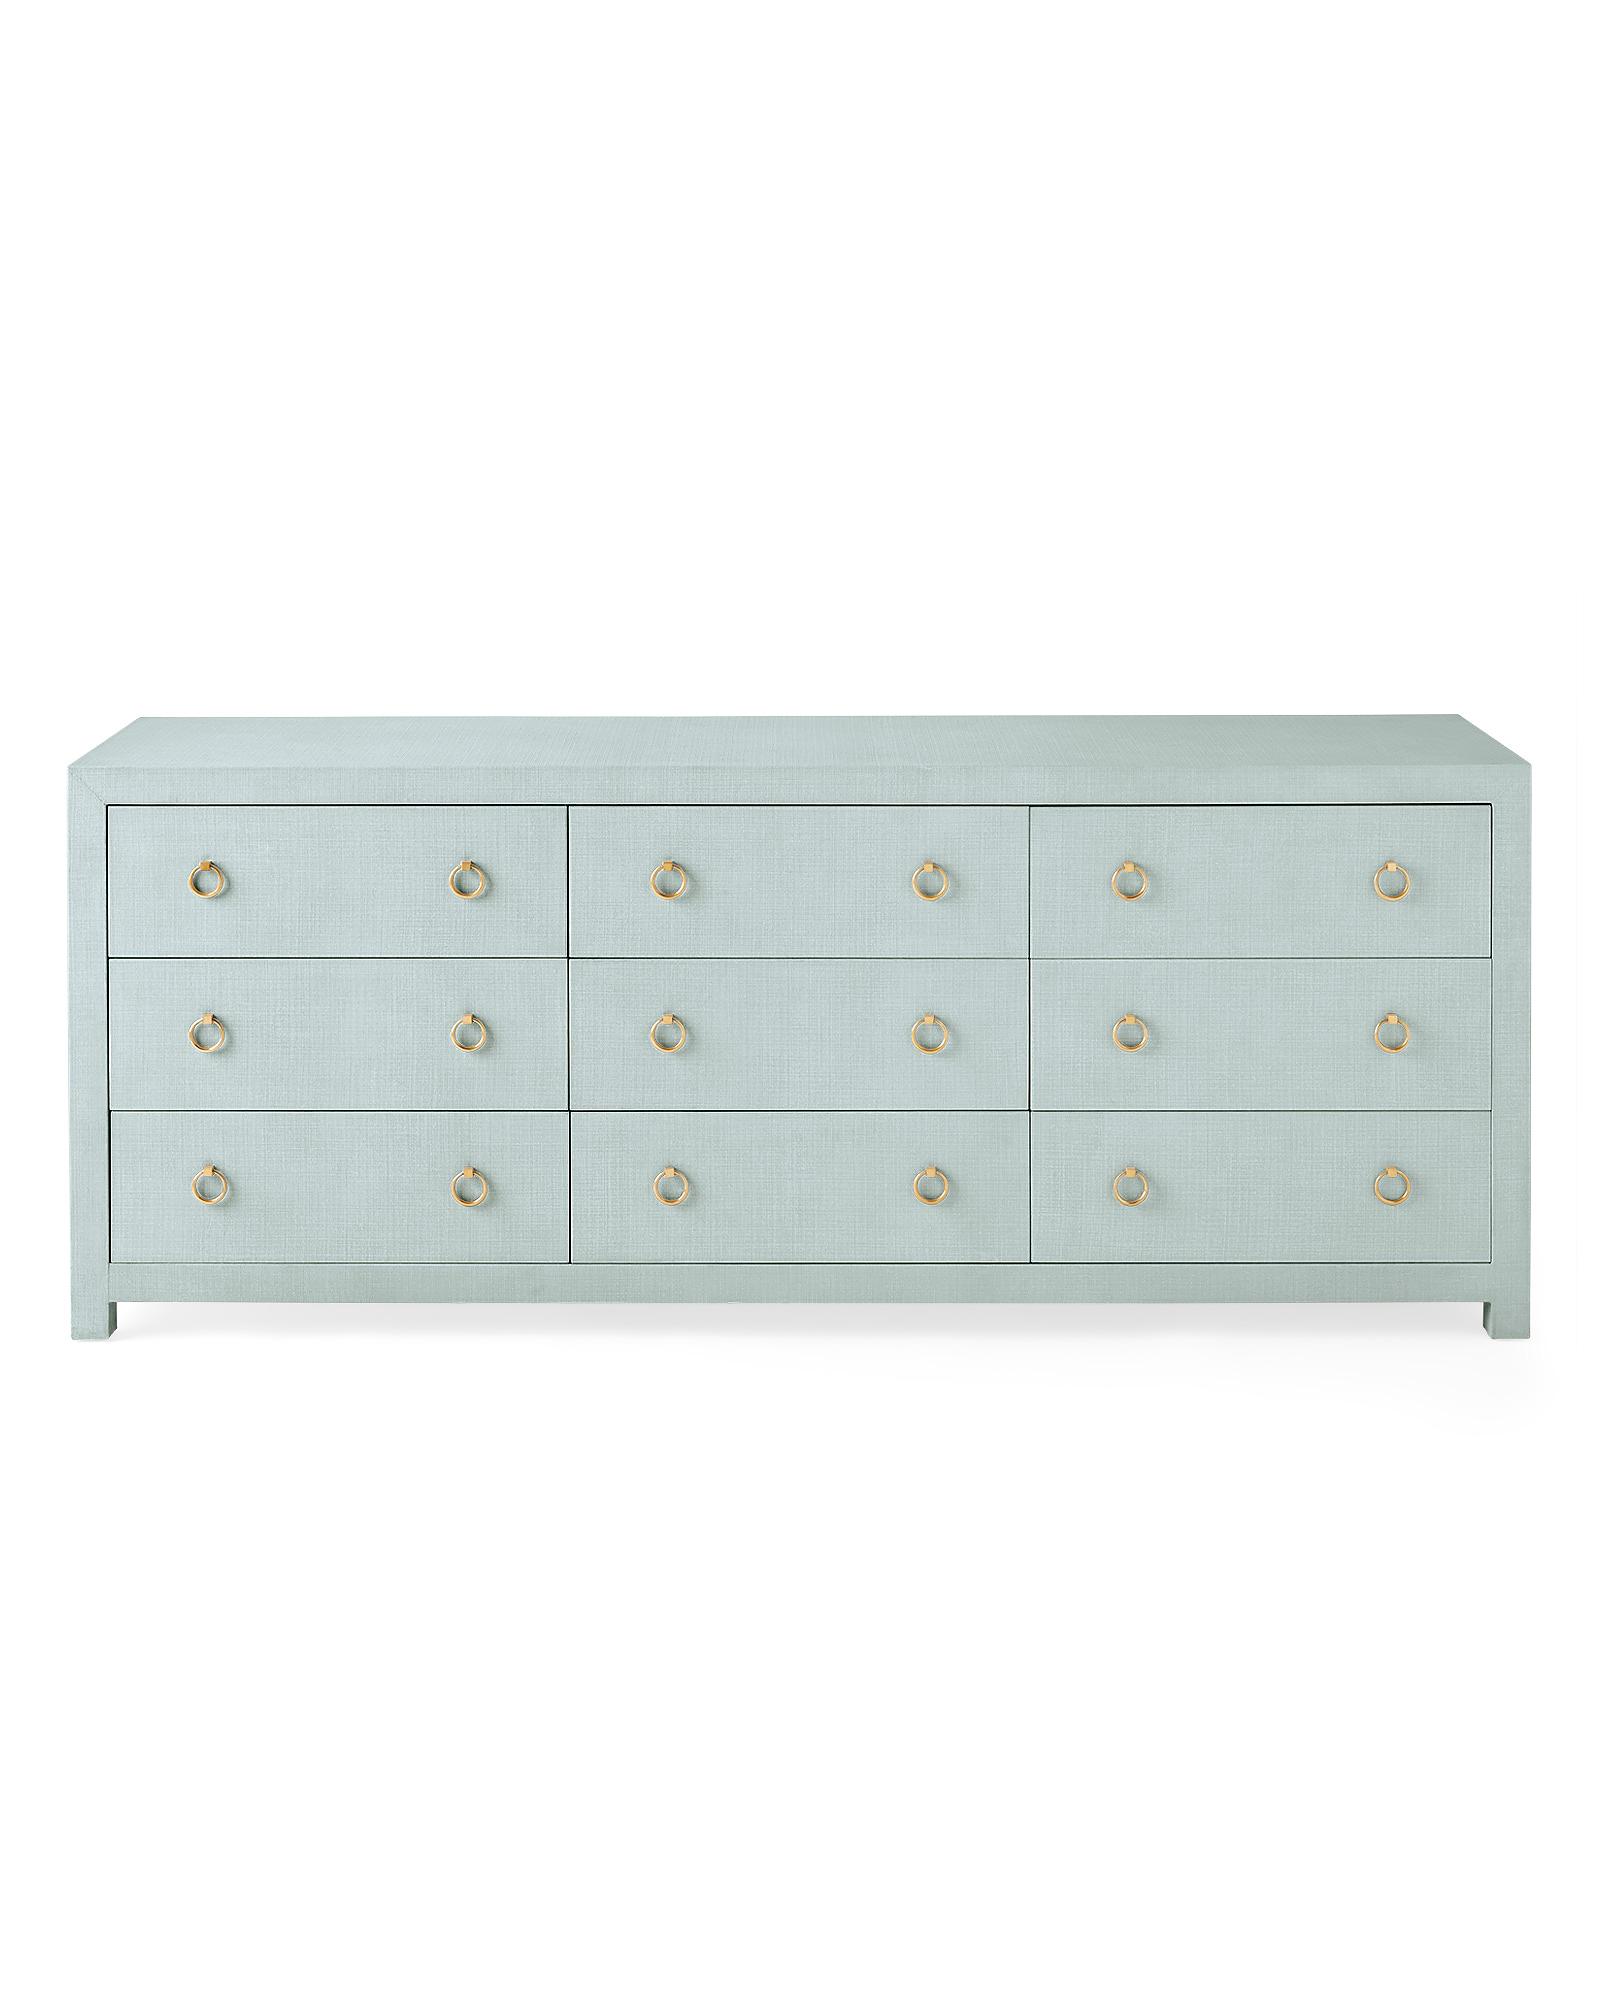 Shop Driftway Dresser (SERENA & LILY), Size: Wide 6-Drawer, Color: Coastal Blue, Quantity: 1 from Serena & Lily on Openhaus